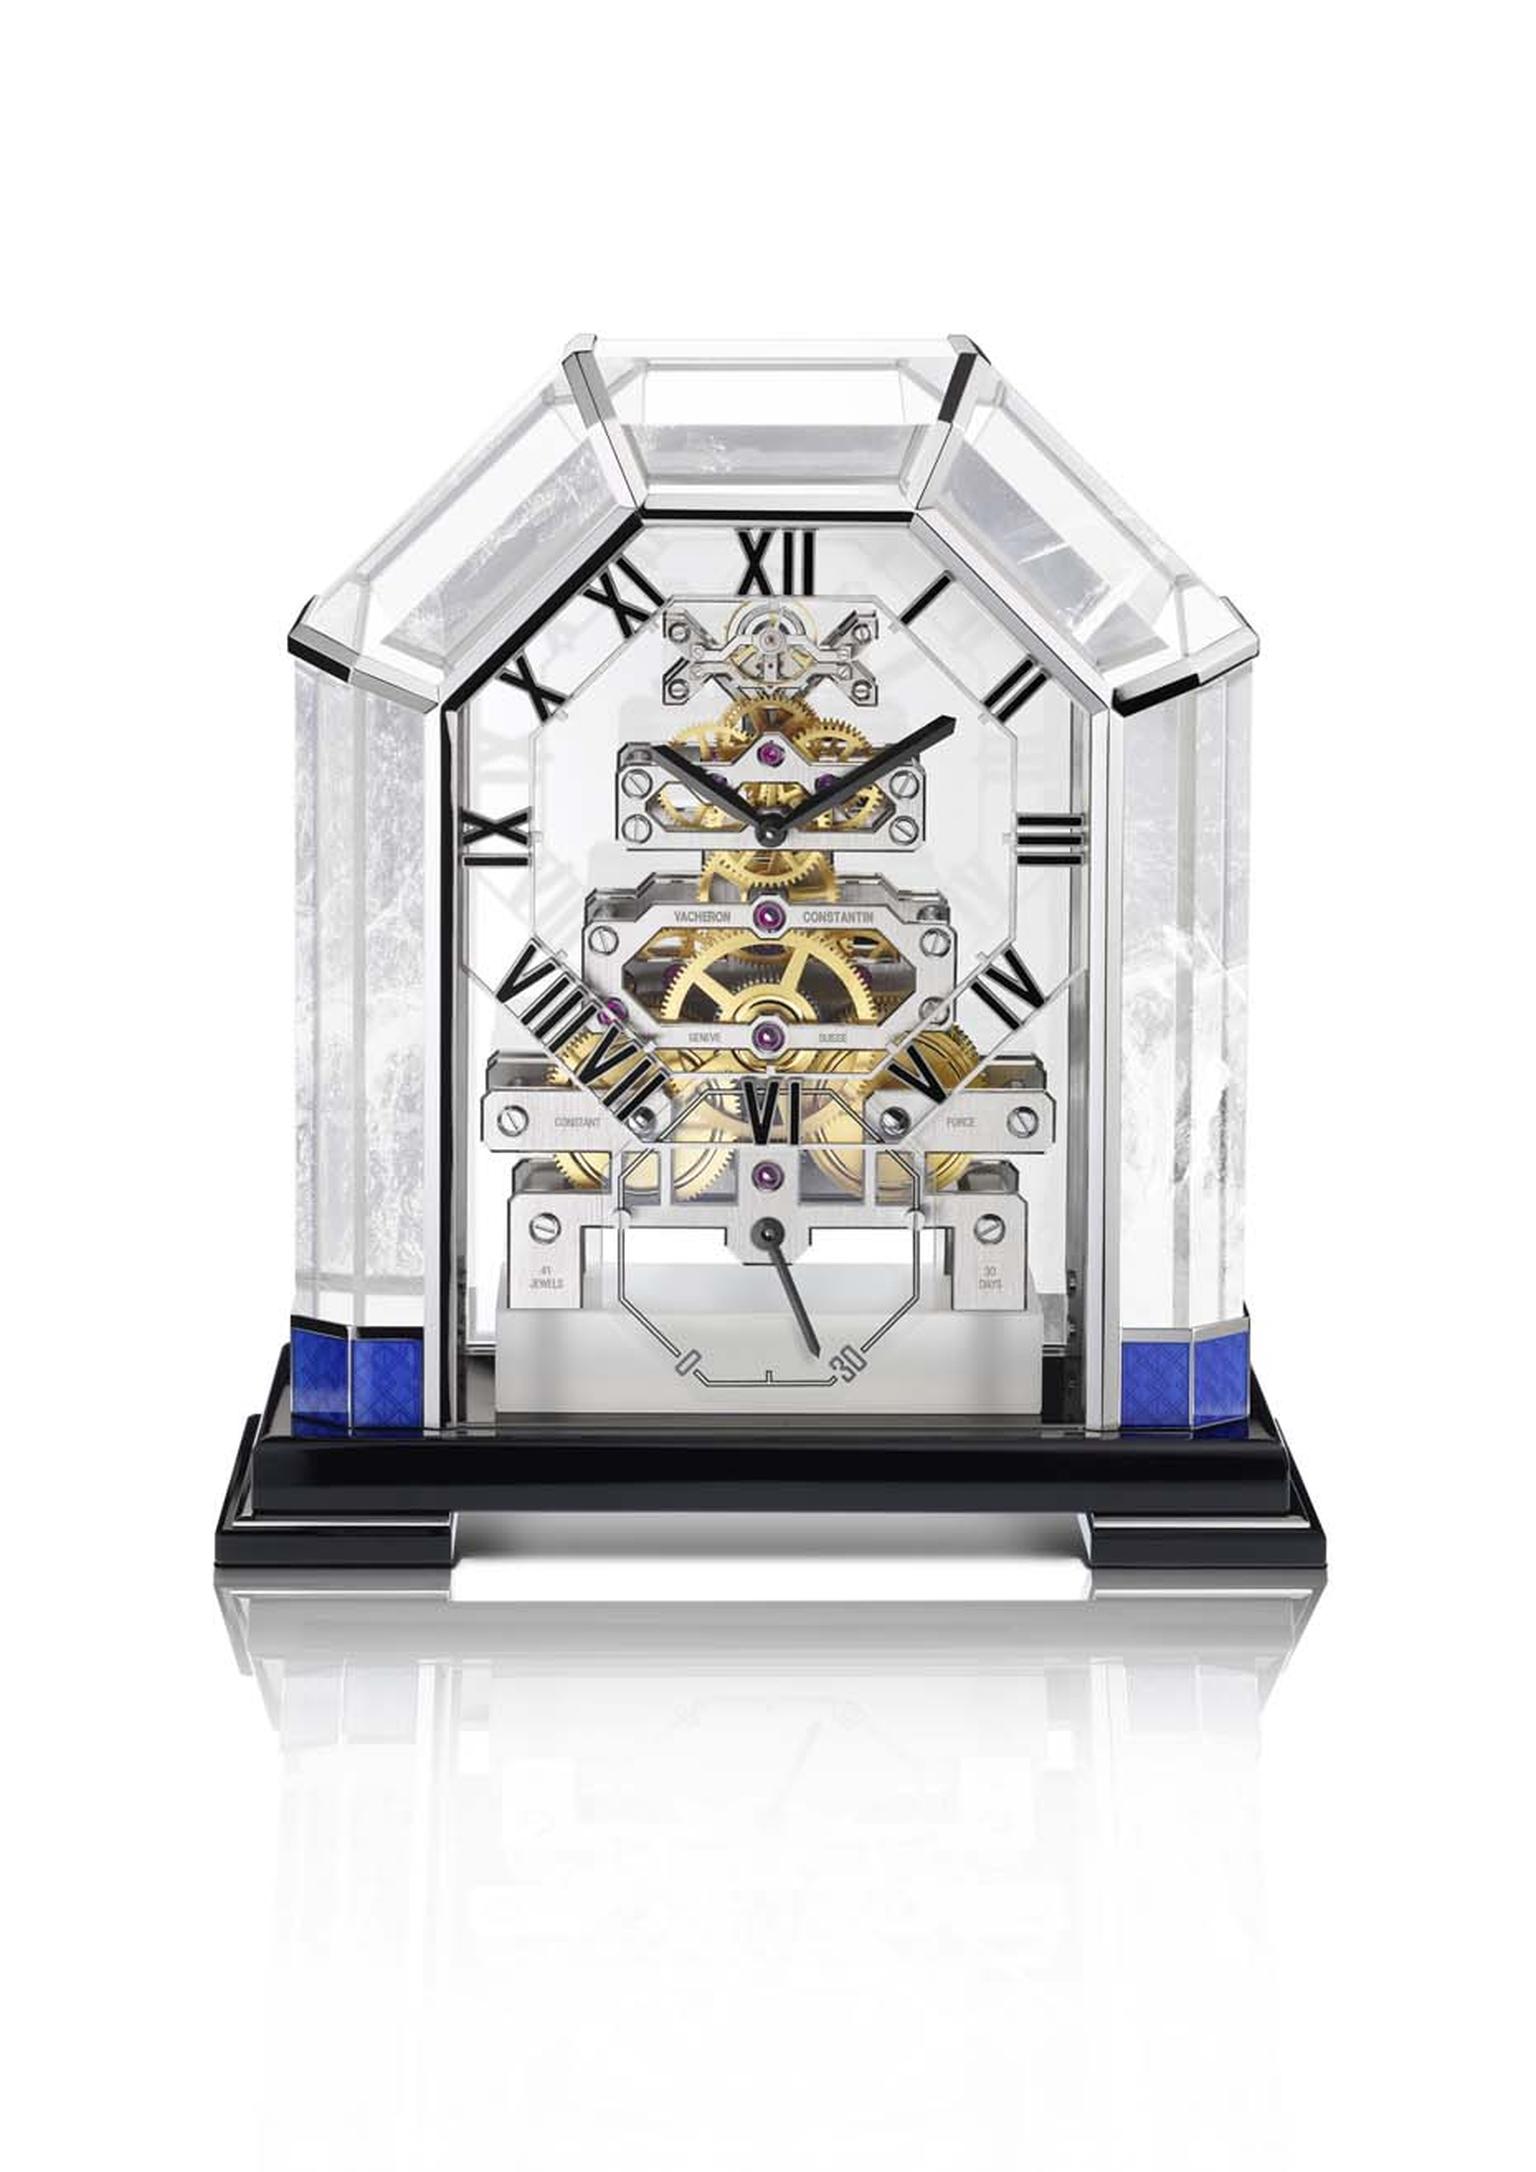 the Arca, a unique and beautifully crafted clock made from rock crystal. It offers a clear view of the open-worked, manual-winding calibre 9260. Built around seven hand-bevelled bridges, the exceptional power reserve of 30 days means that the clock will o